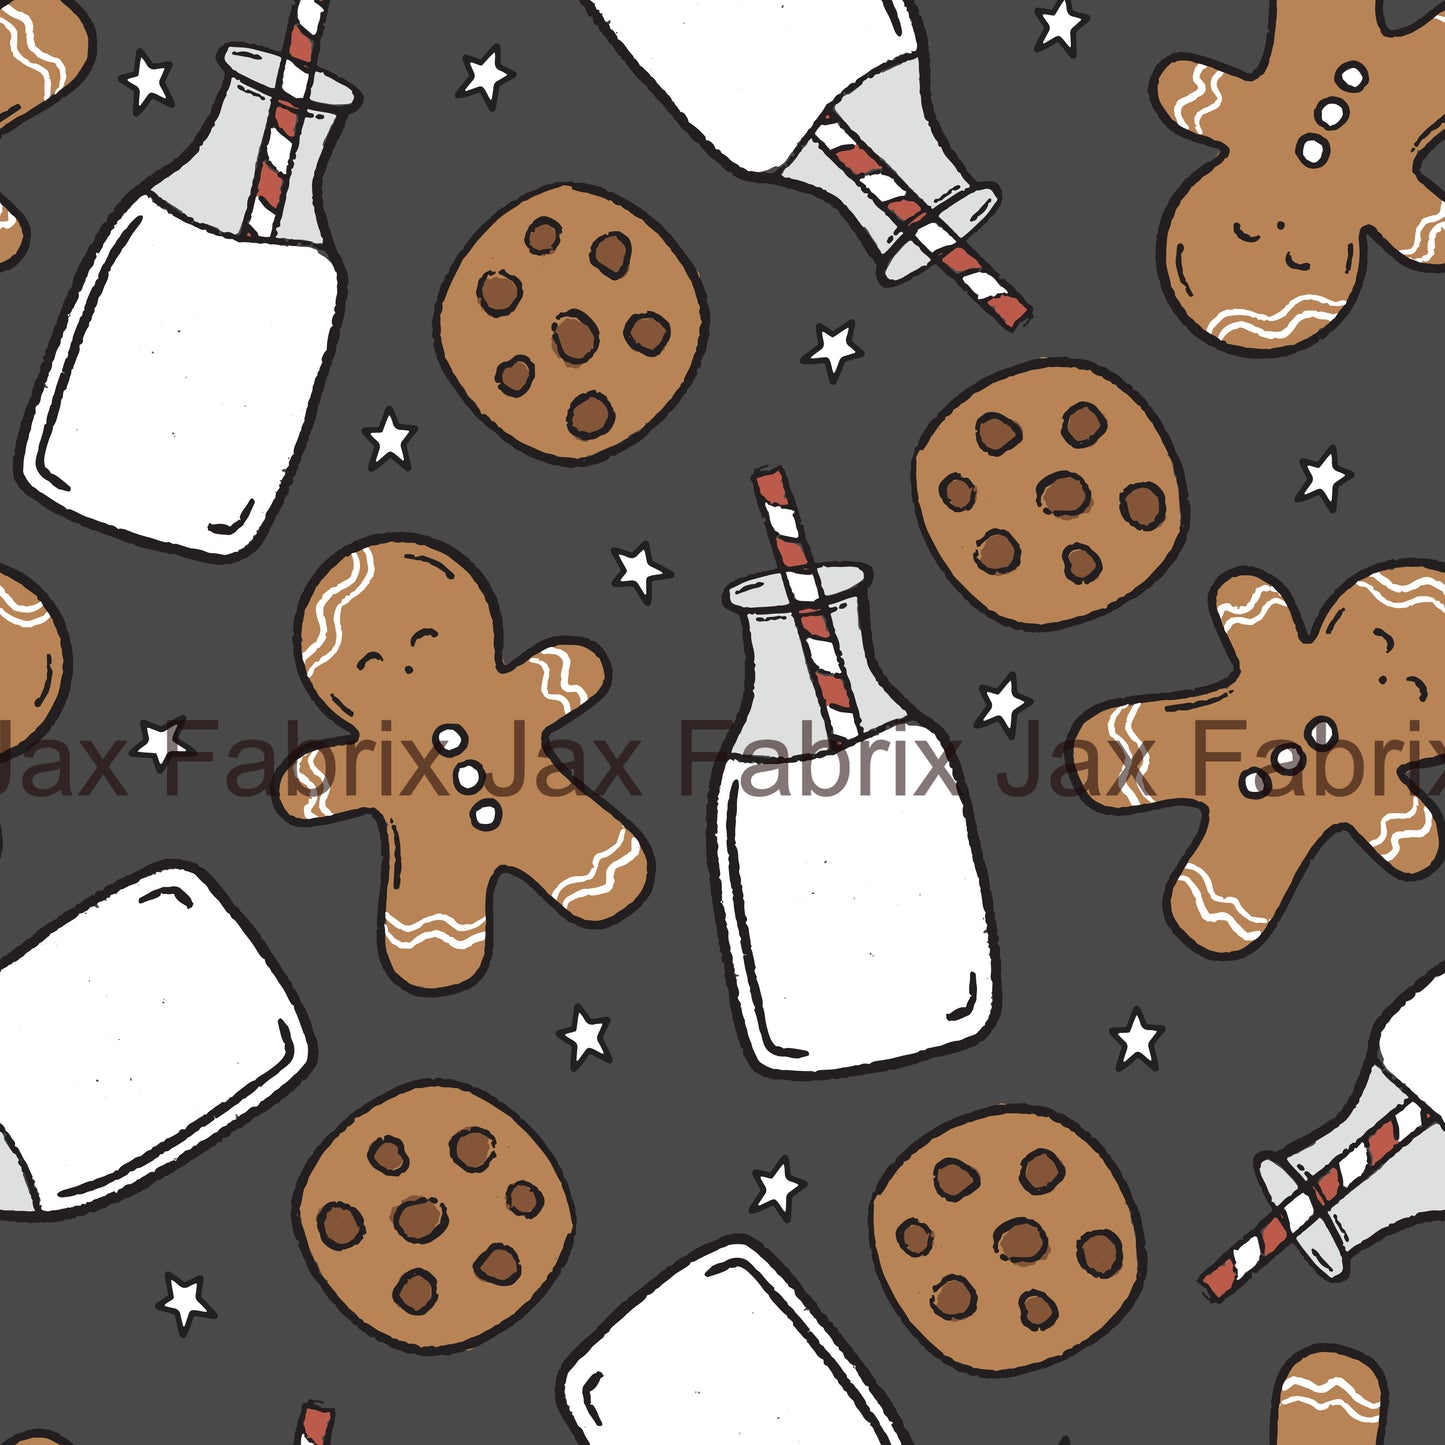 Milk and Cookies RPC9